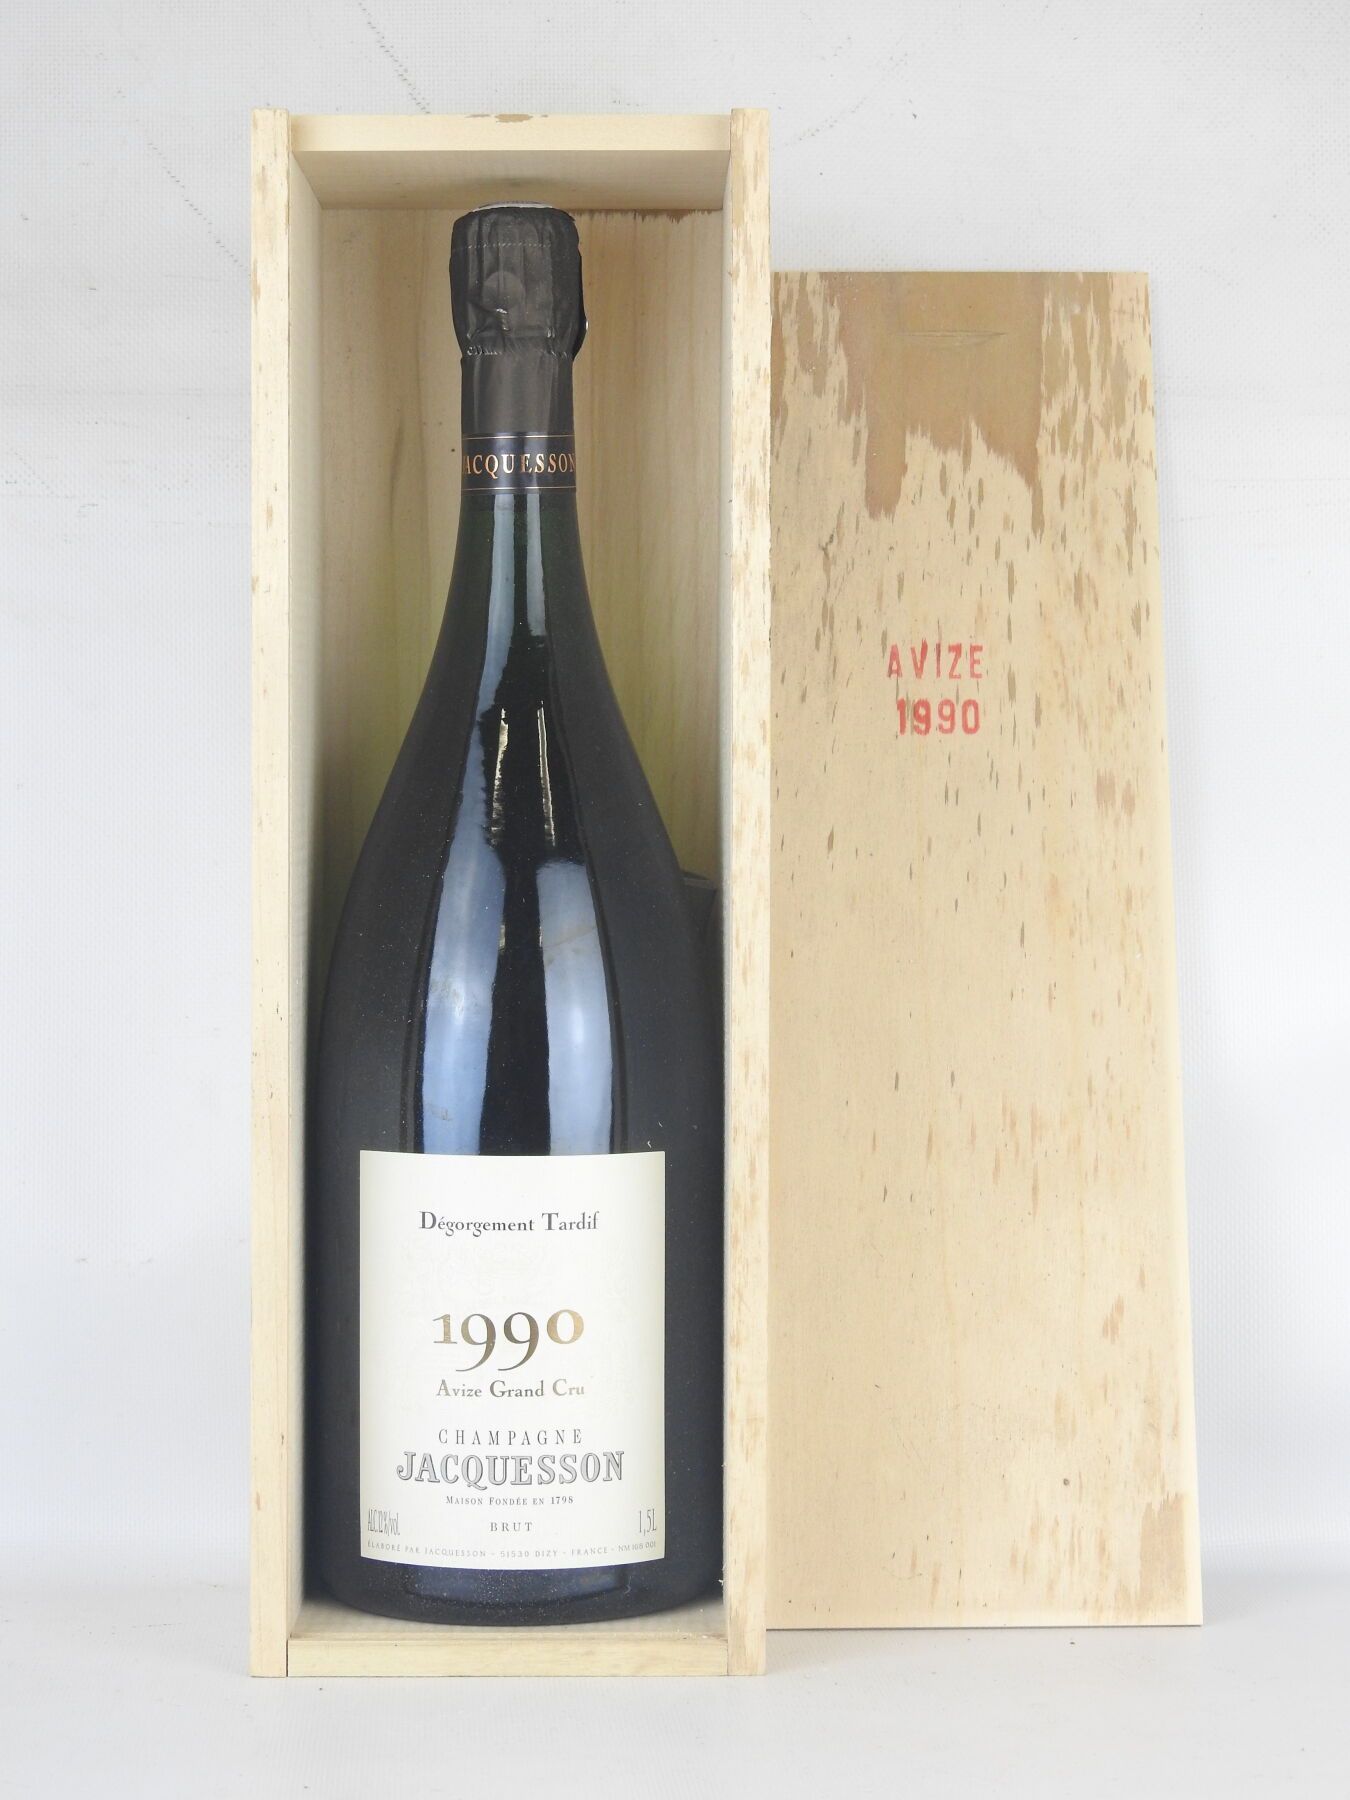 Null 1 magnum Champagne Jacquesson degorgement tardif 1990. Wooden case.